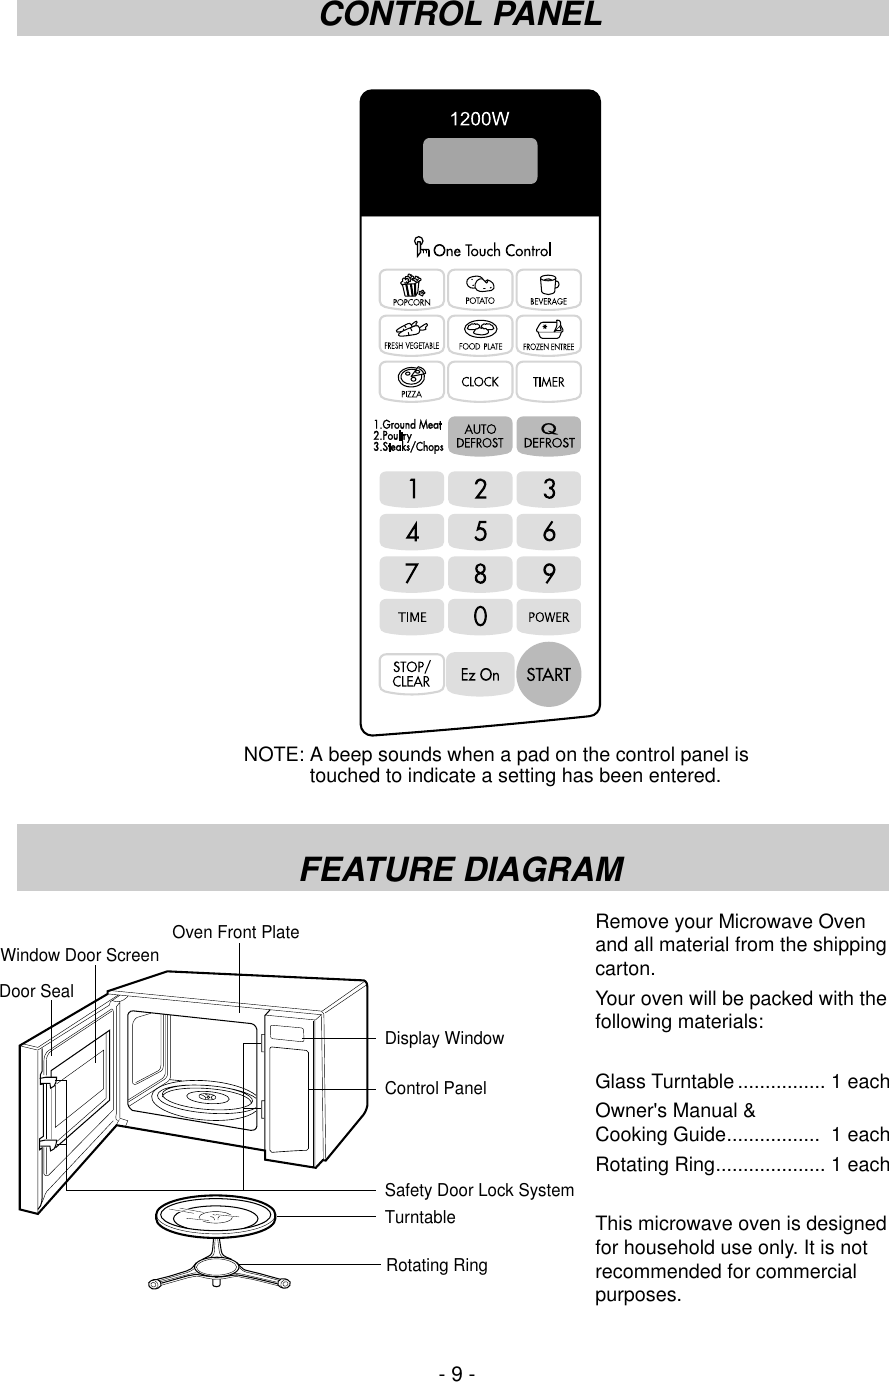 - 9 -CONTROL PANELFEATURE DIAGRAMNOTE: A beep sounds when a pad on the control panel is            touched to indicate a setting has been entered.Oven Front Plate Window Door ScreenDoor SealDisplay WindowControl PanelSafety Door Lock SystemTurntableRotating RingRemove your Microwave Ovenand all material from the shippingcarton.Your oven will be packed with the following materials:Glass Turntable ................ 1 eachOwner&apos;s Manual &amp; Cooking Guide................. 1 eachRotating Ring.................... 1 eachThis microwave oven is designedfor household use only. It is notrecommended for commercialpurposes.